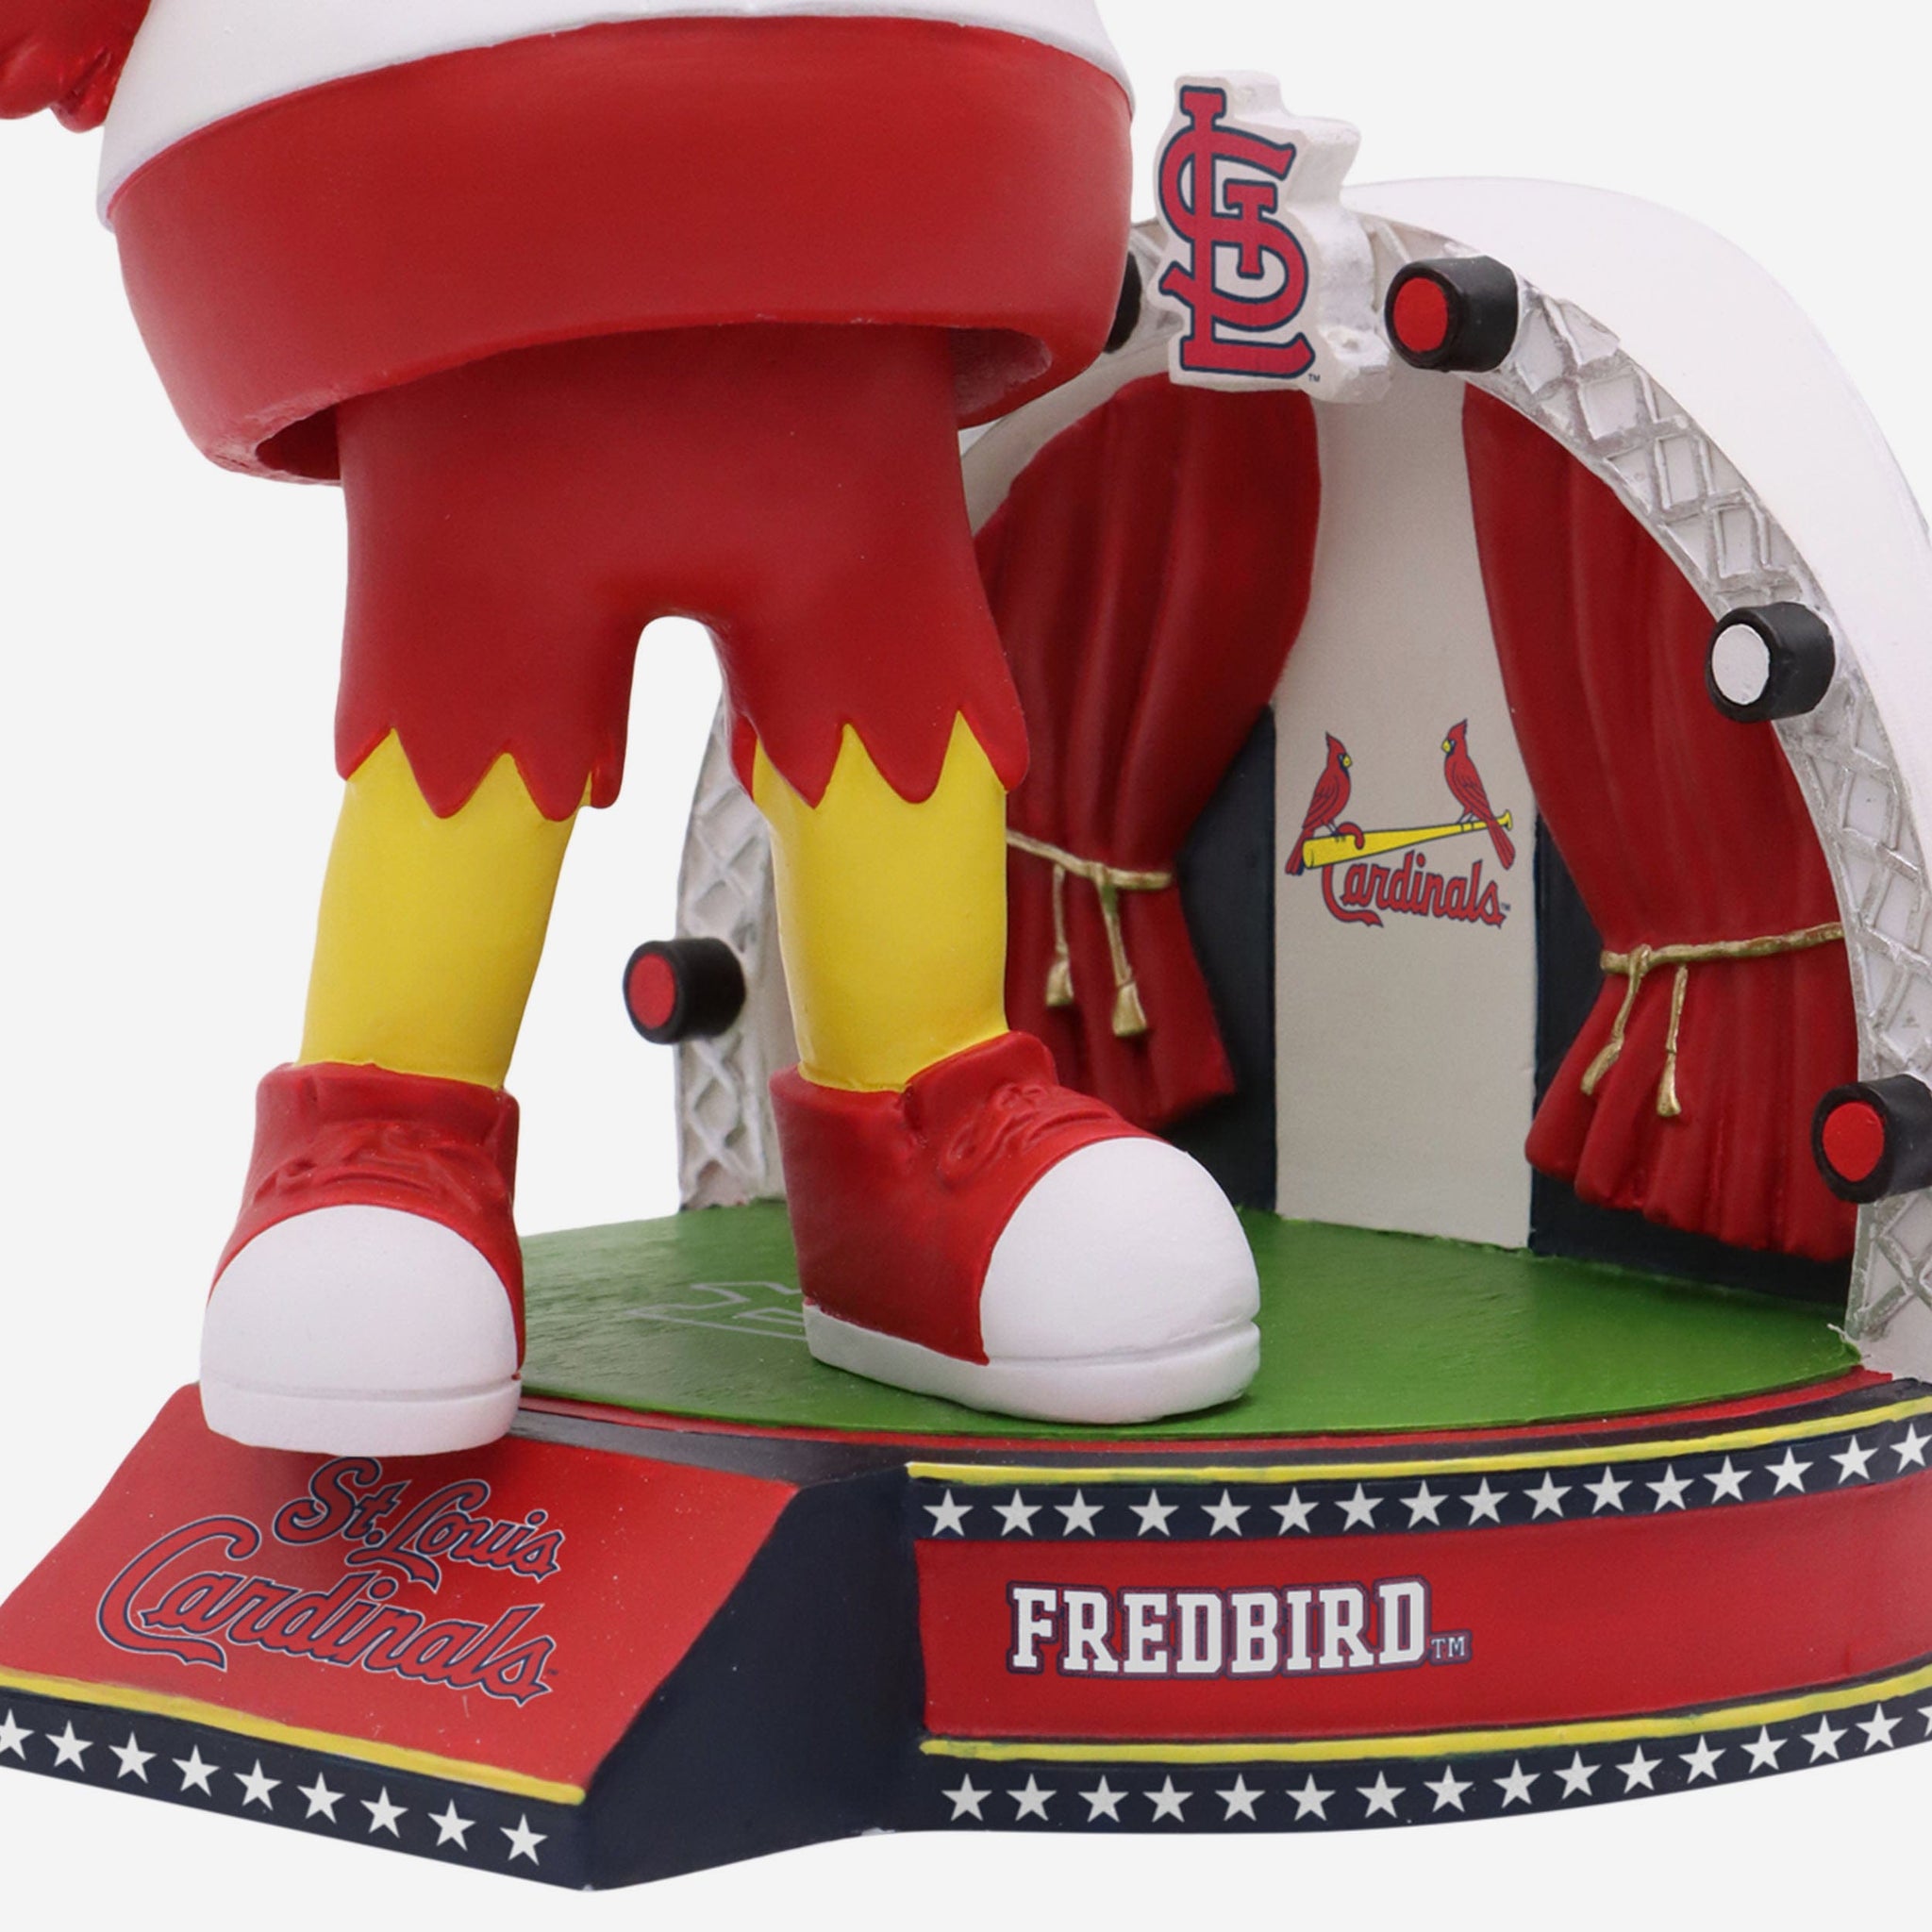 FOCO St Louis Cardinals Apparel & Clothing Items. Officially